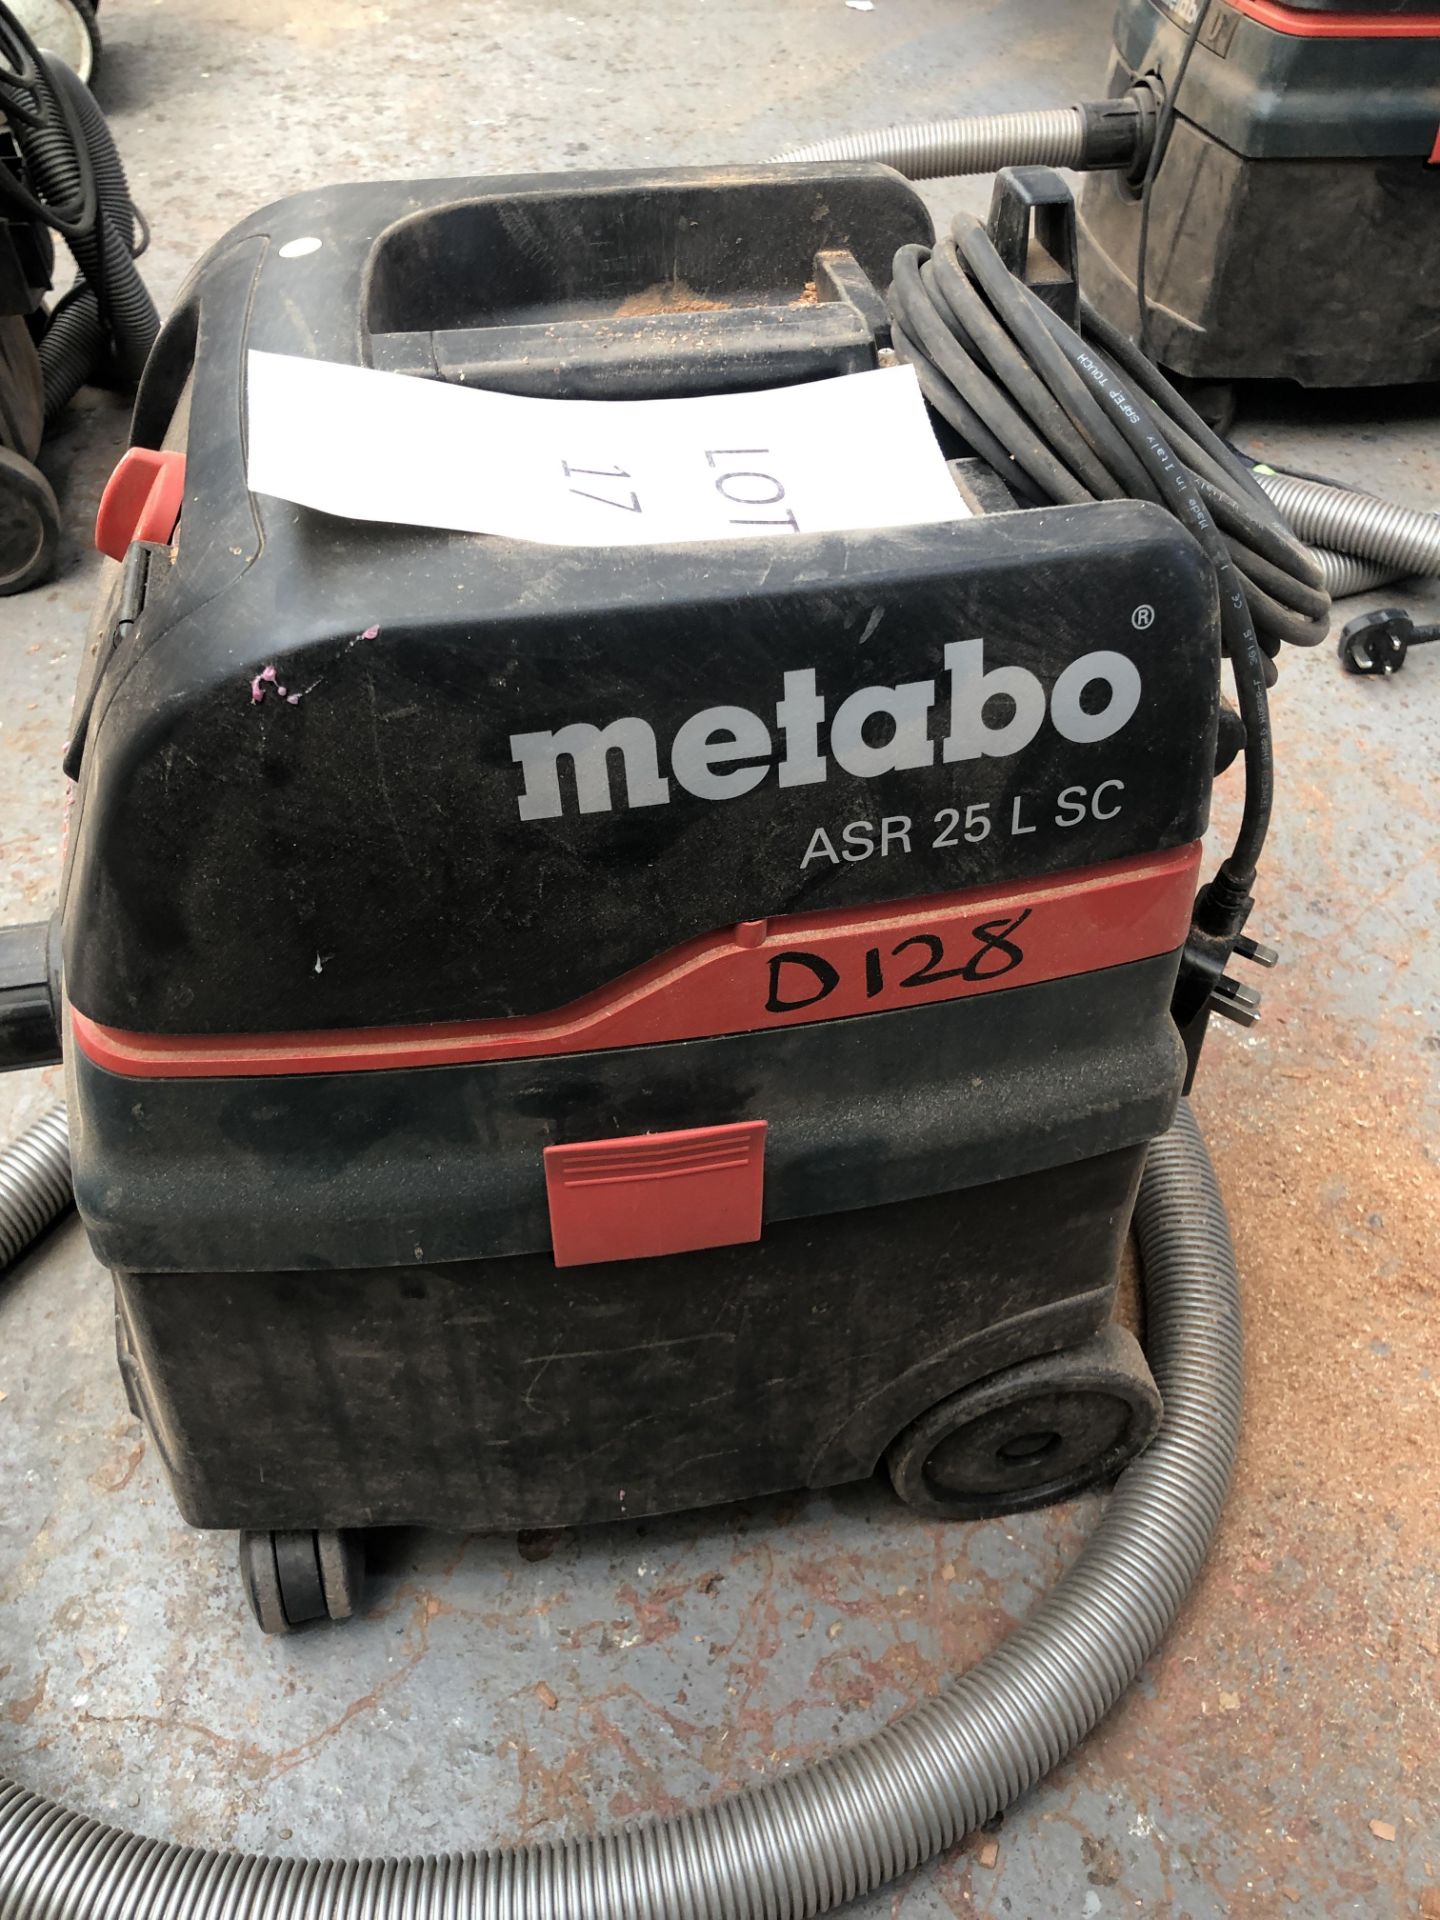 Metabo ASR25L SC Multi Dust Extraction Unit (Please note: Collection by appointment Wednesday 27th - Image 2 of 5